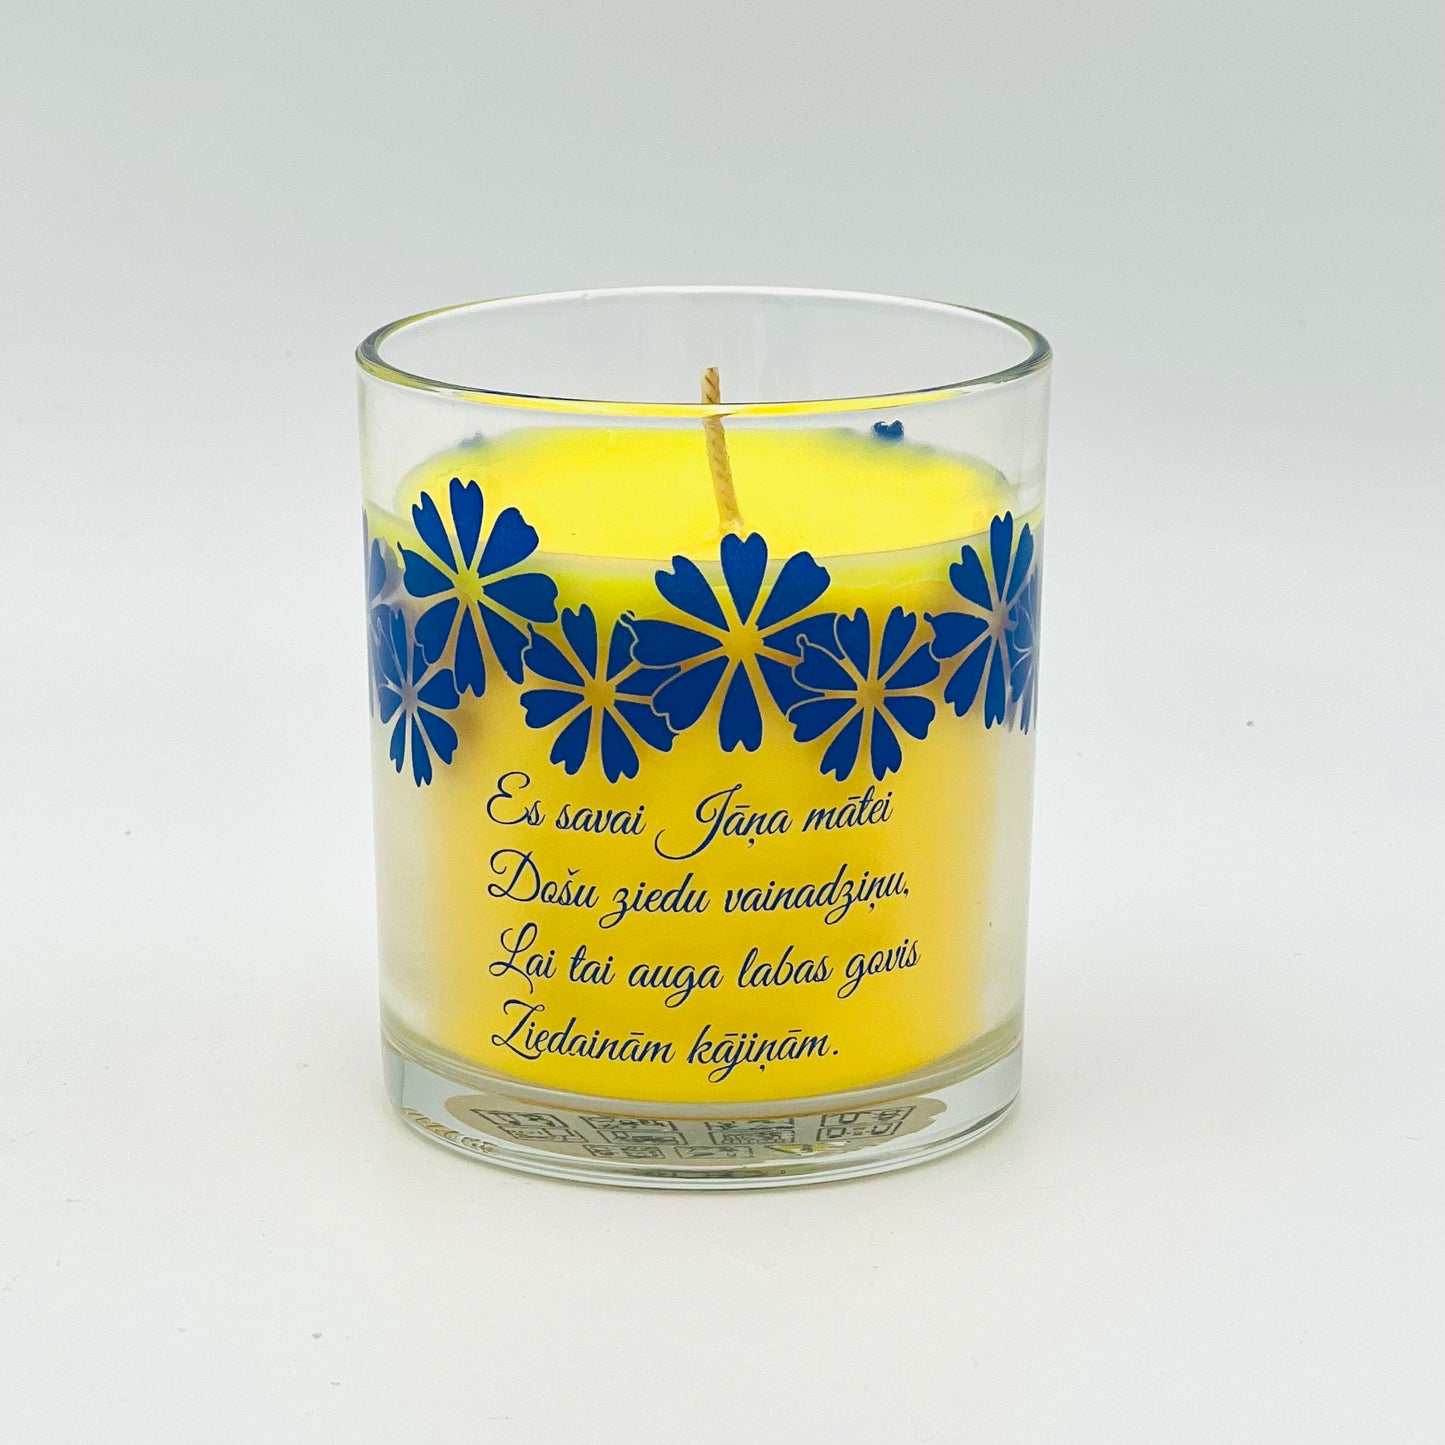 Ligo candle "Mother of St. John" in a glass container